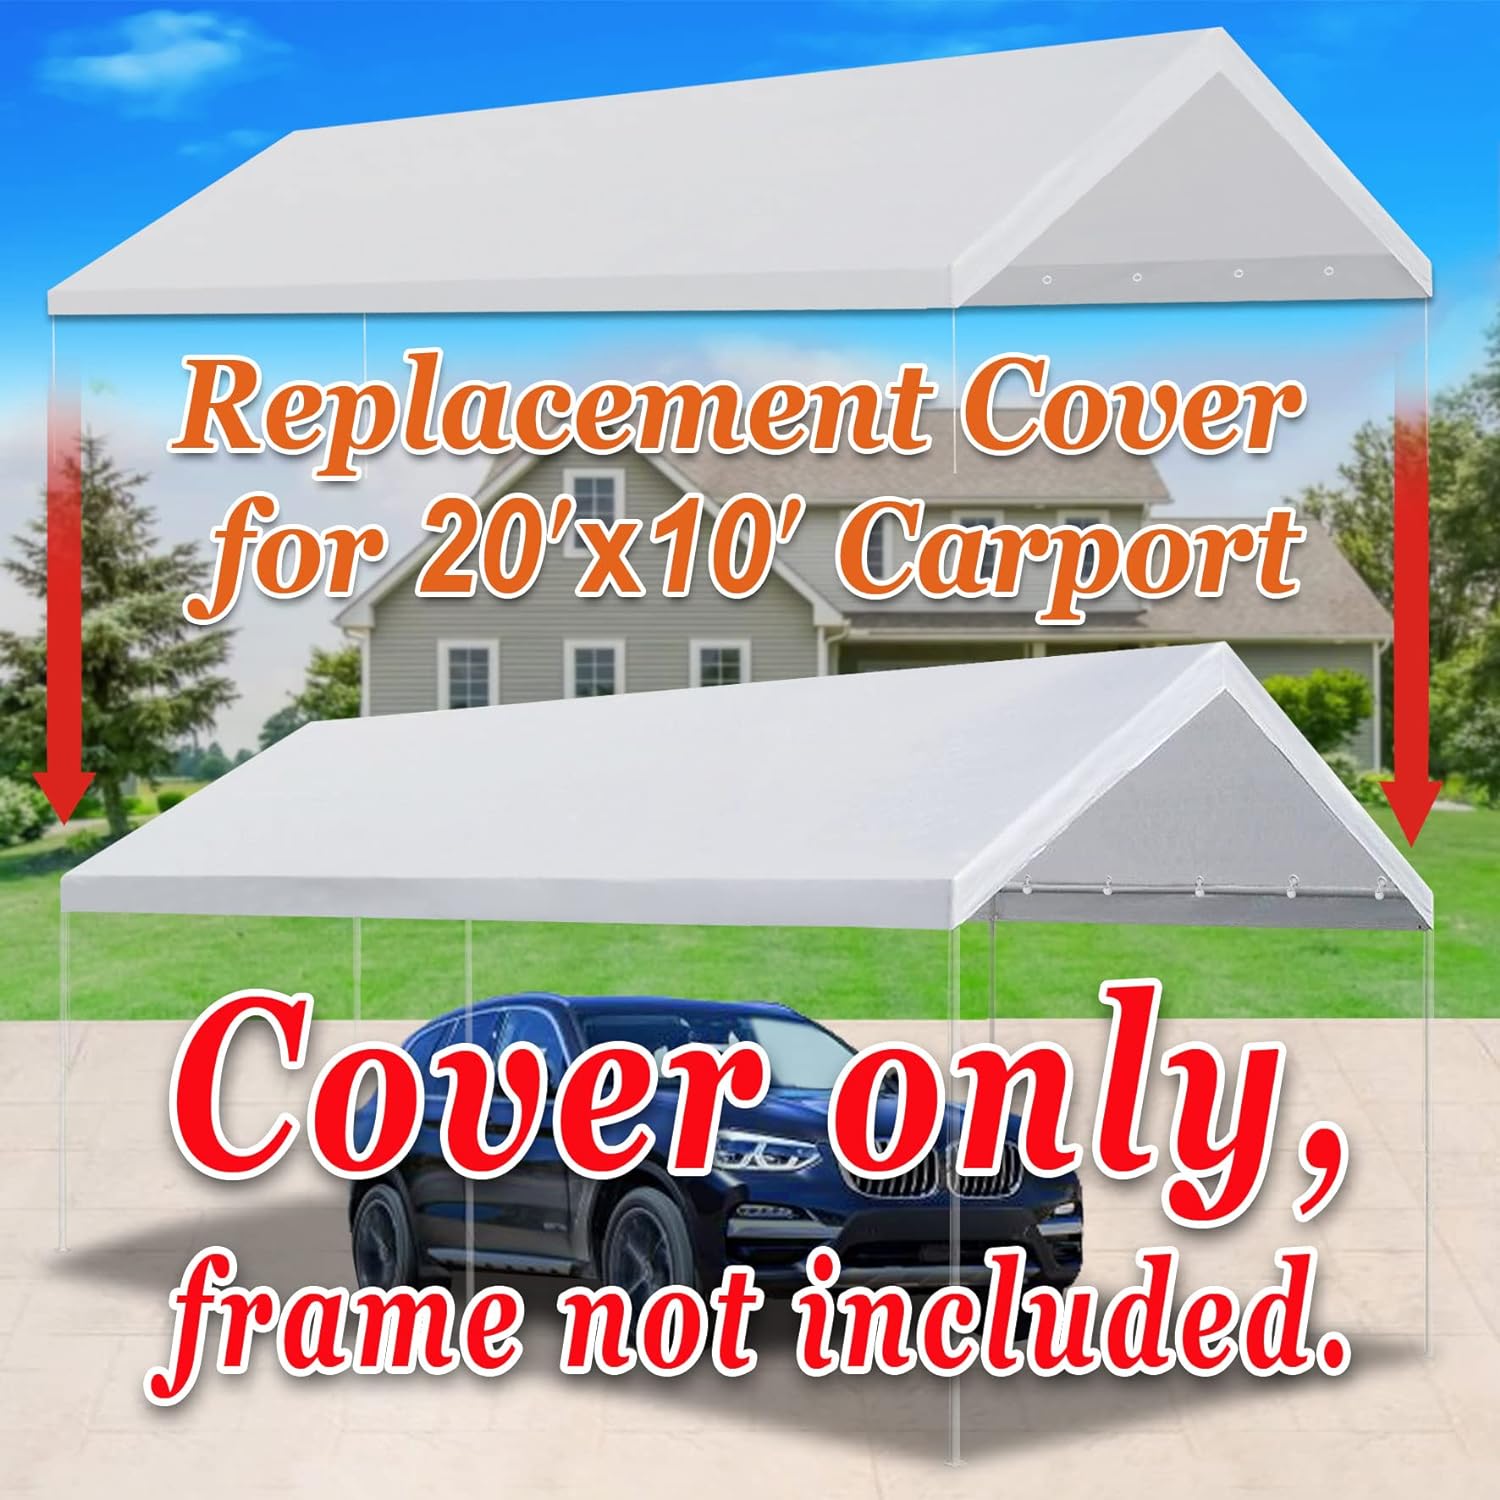 Sunrise Strong Camel 10 x 20 Carport Canopy Replacement Cover Valance Canopy Replacements Top with Ball Bungees White (Only Cover, Fram